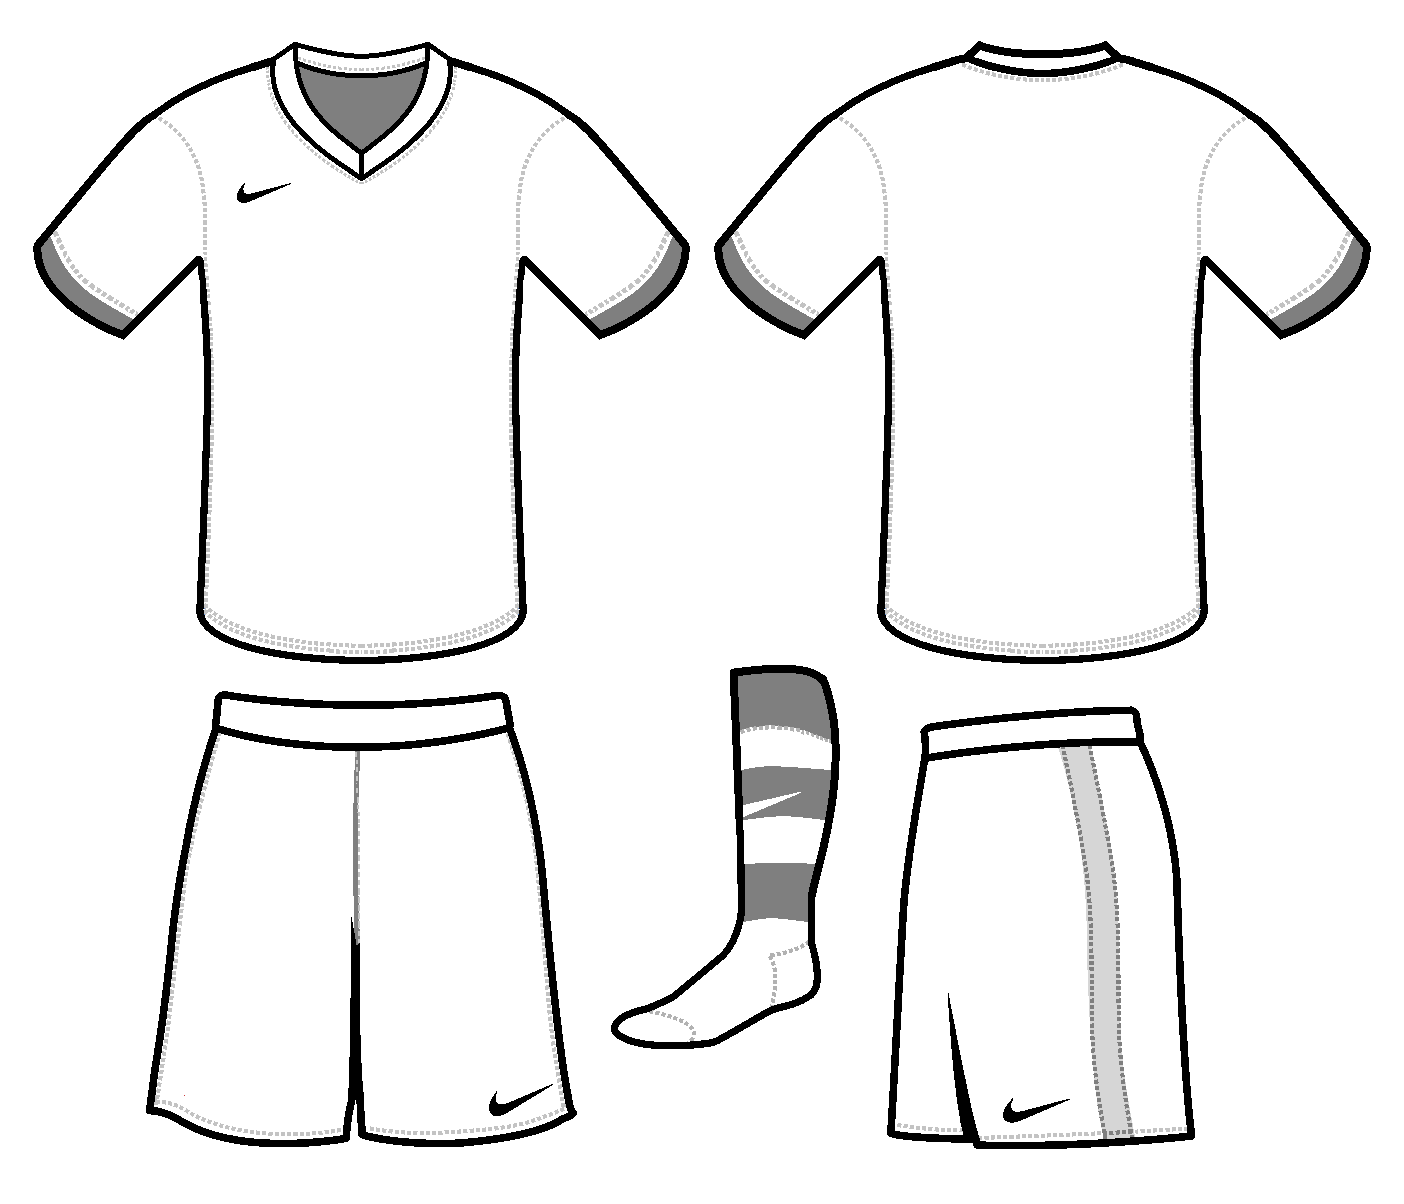 Soccer Jersey Template submited images.